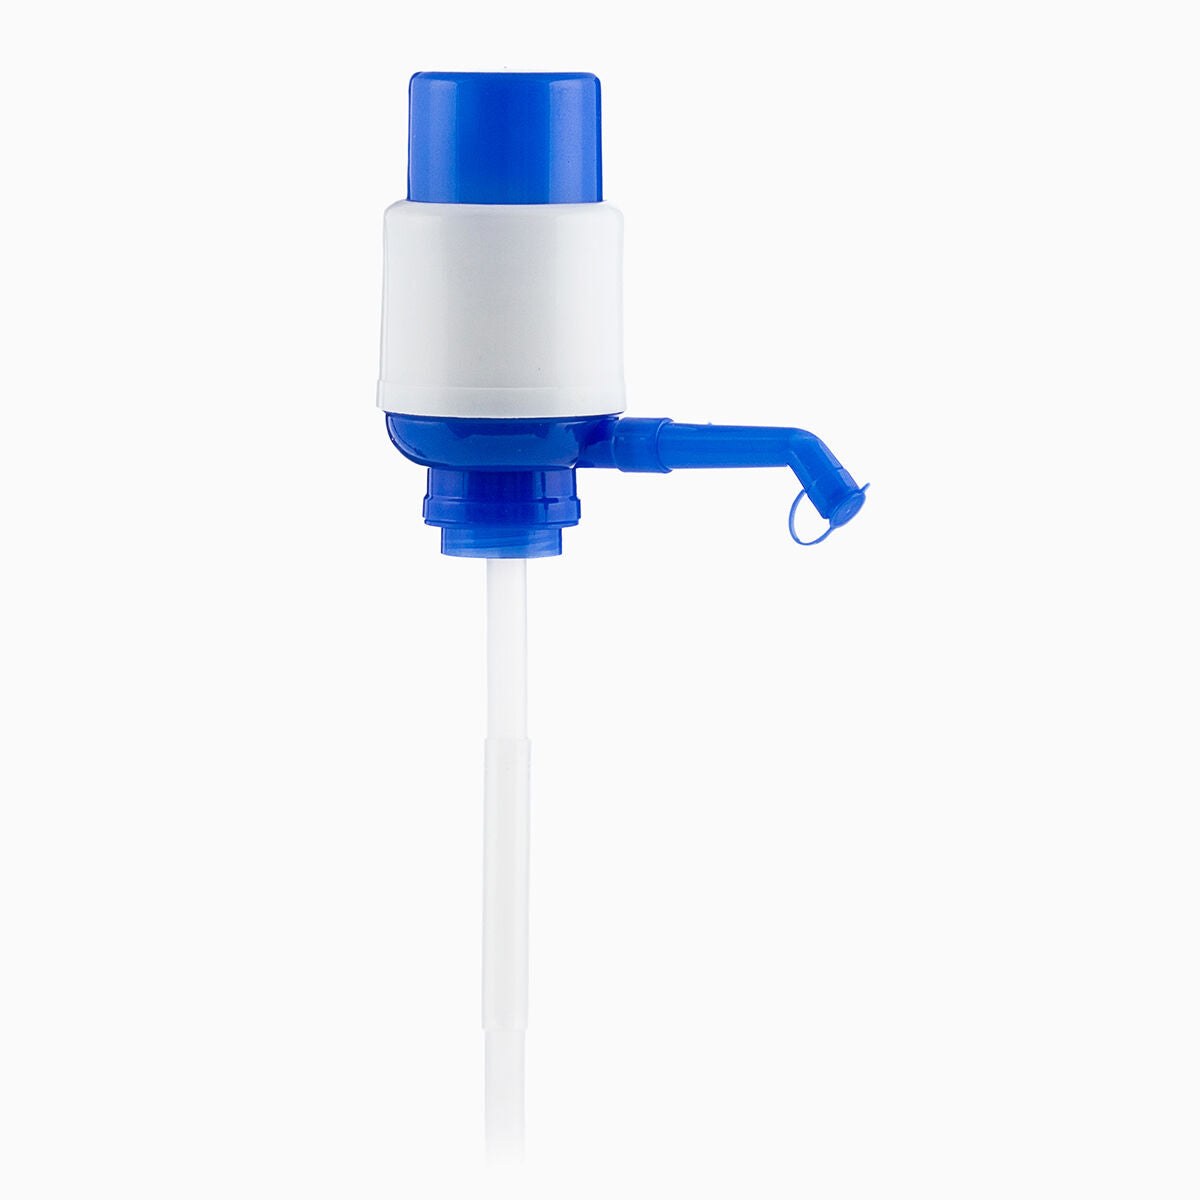 Water Dispenser for XL Containers Watler InnovaGoods